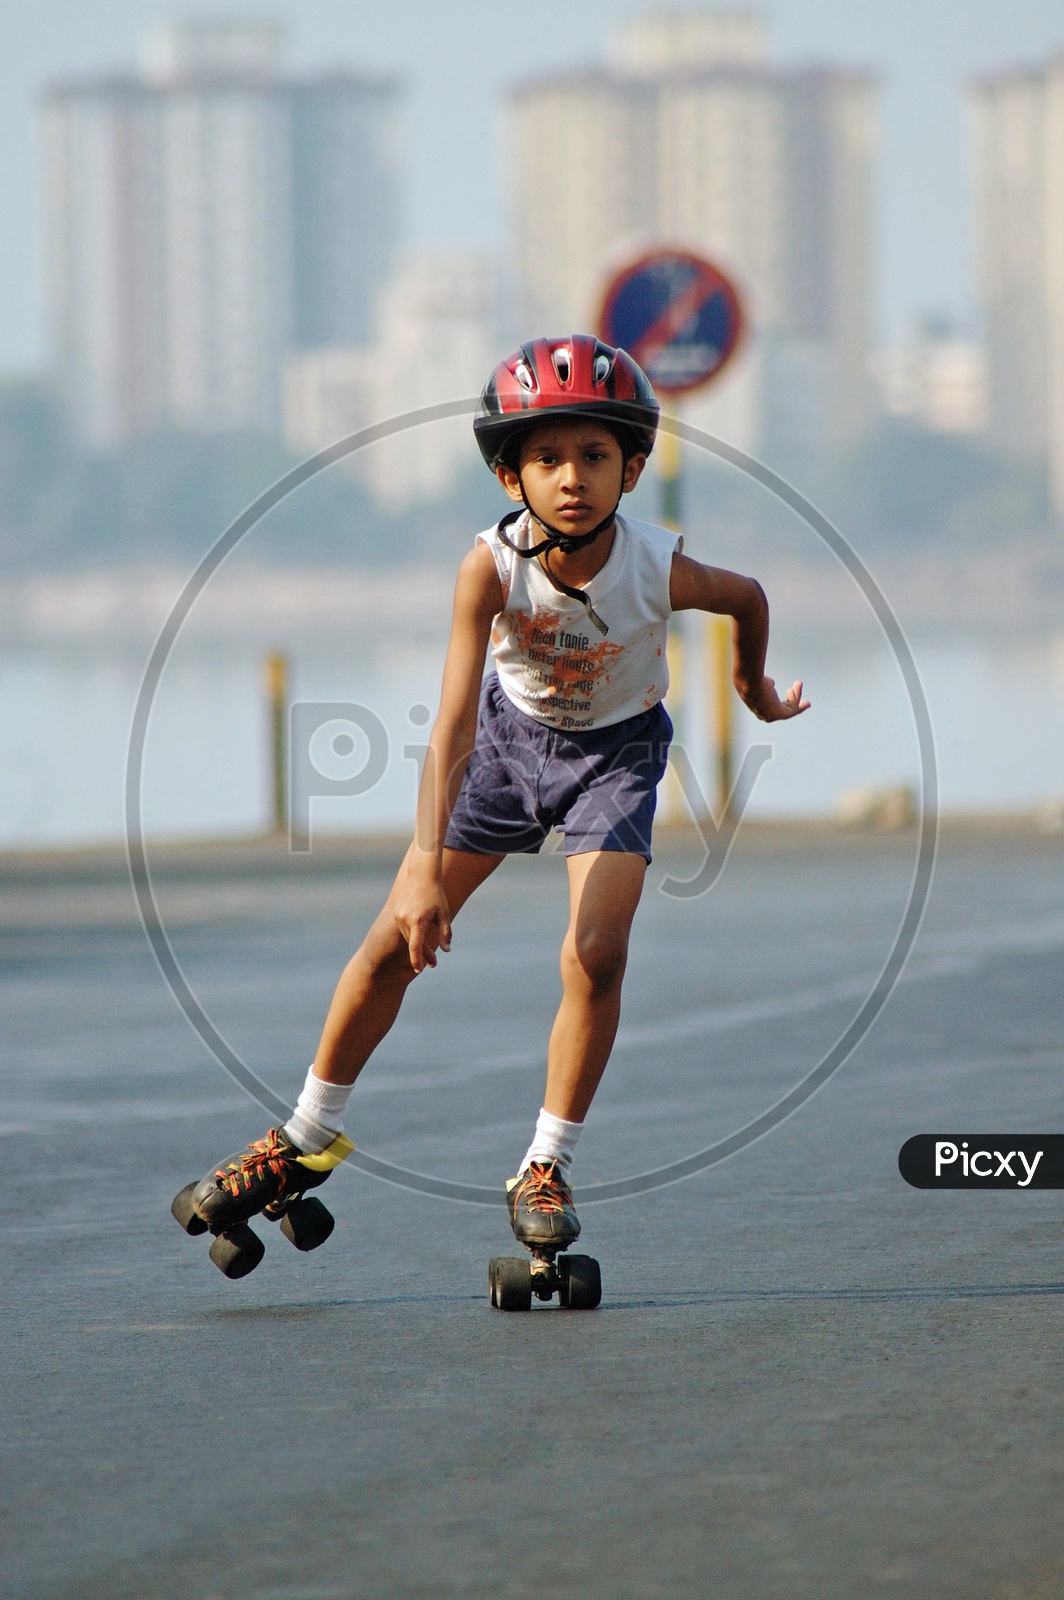 A boy skating on the road wearing a helmet